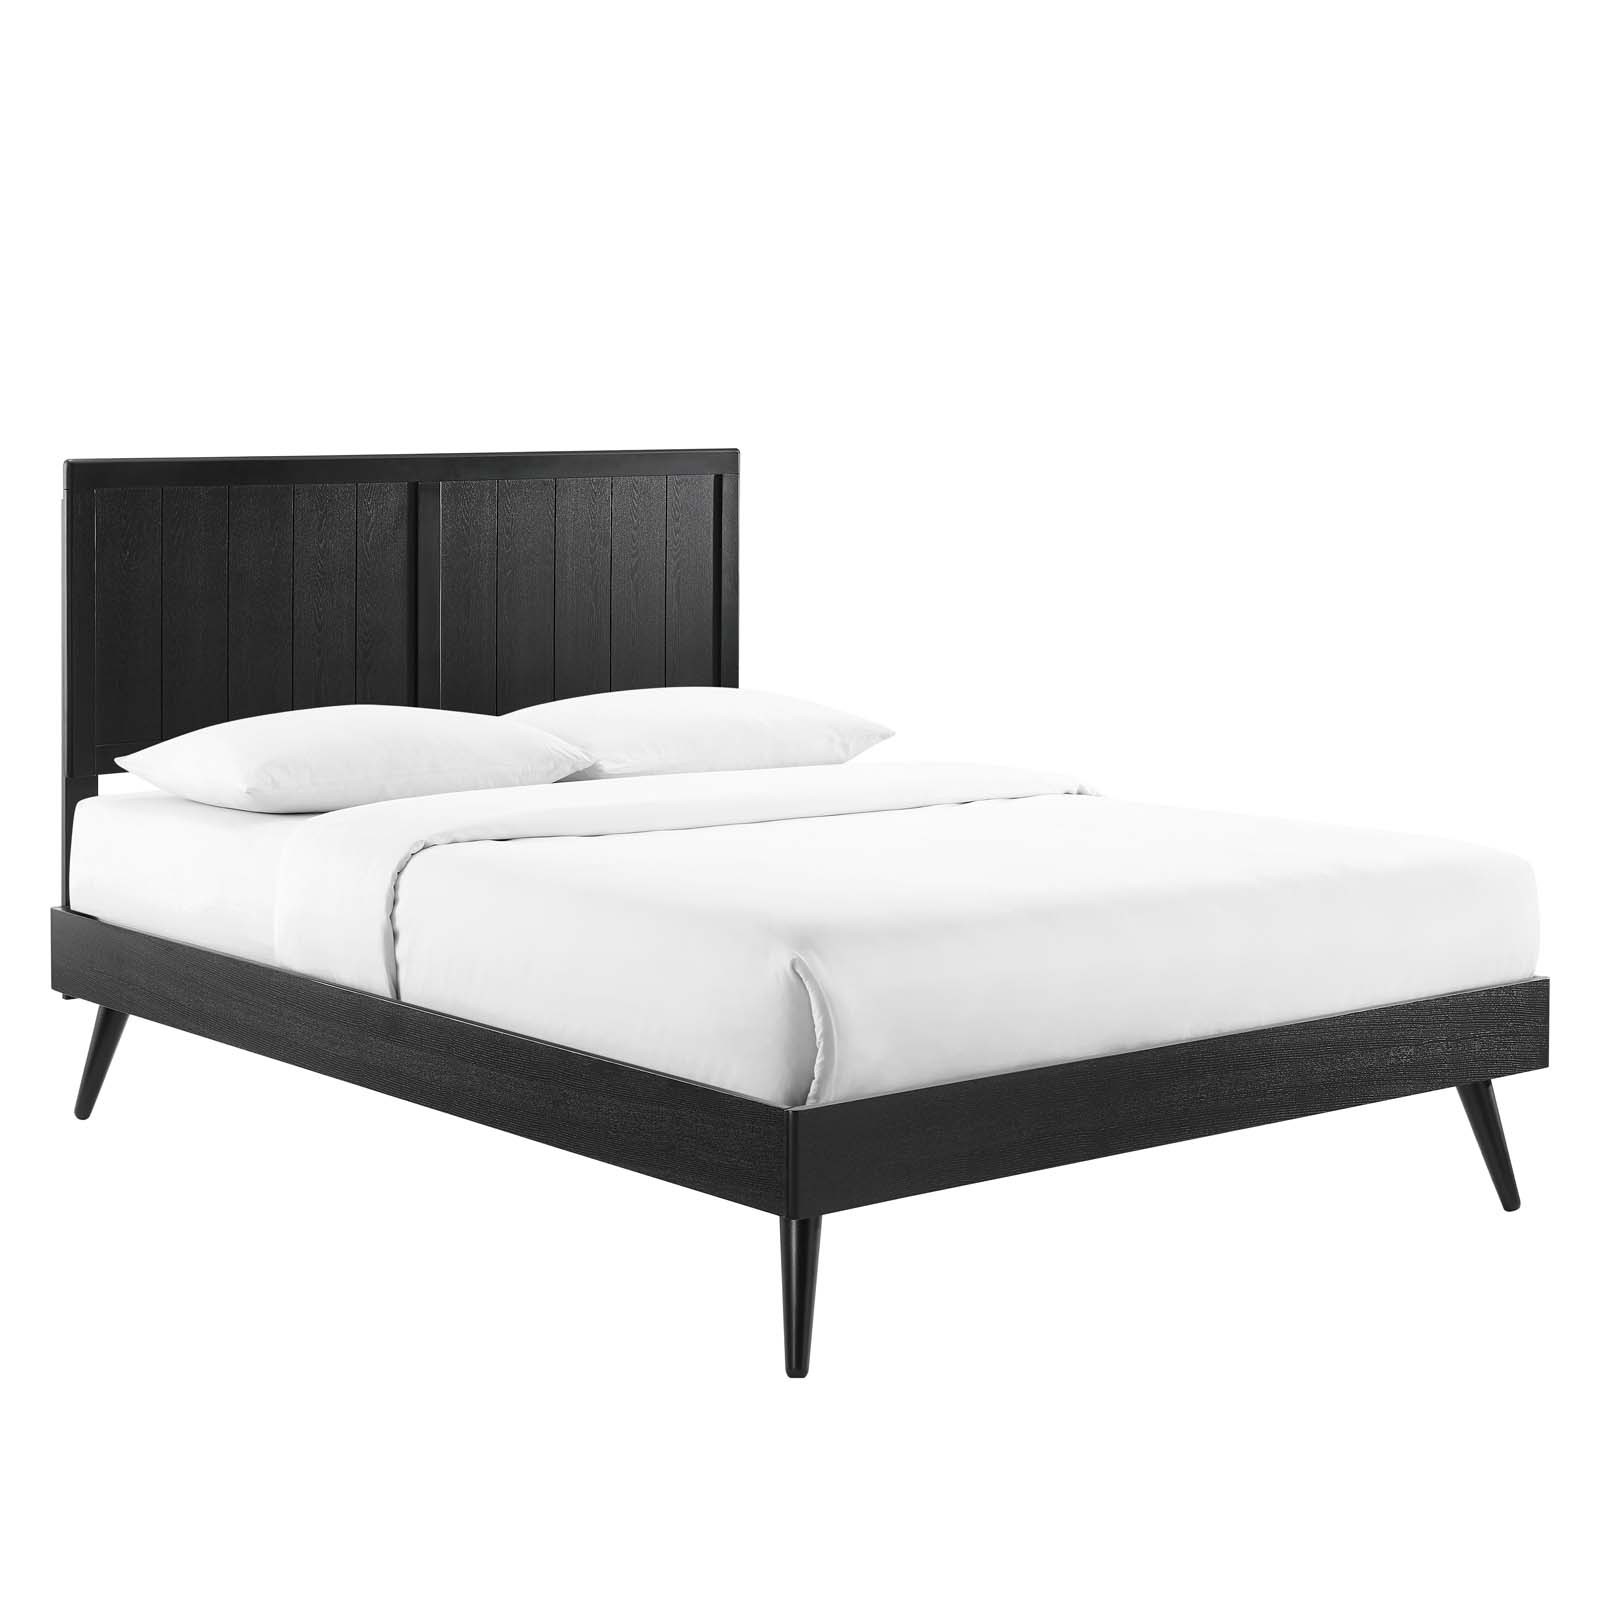 Alana Full Wood Platform Bed With Splayed Legs